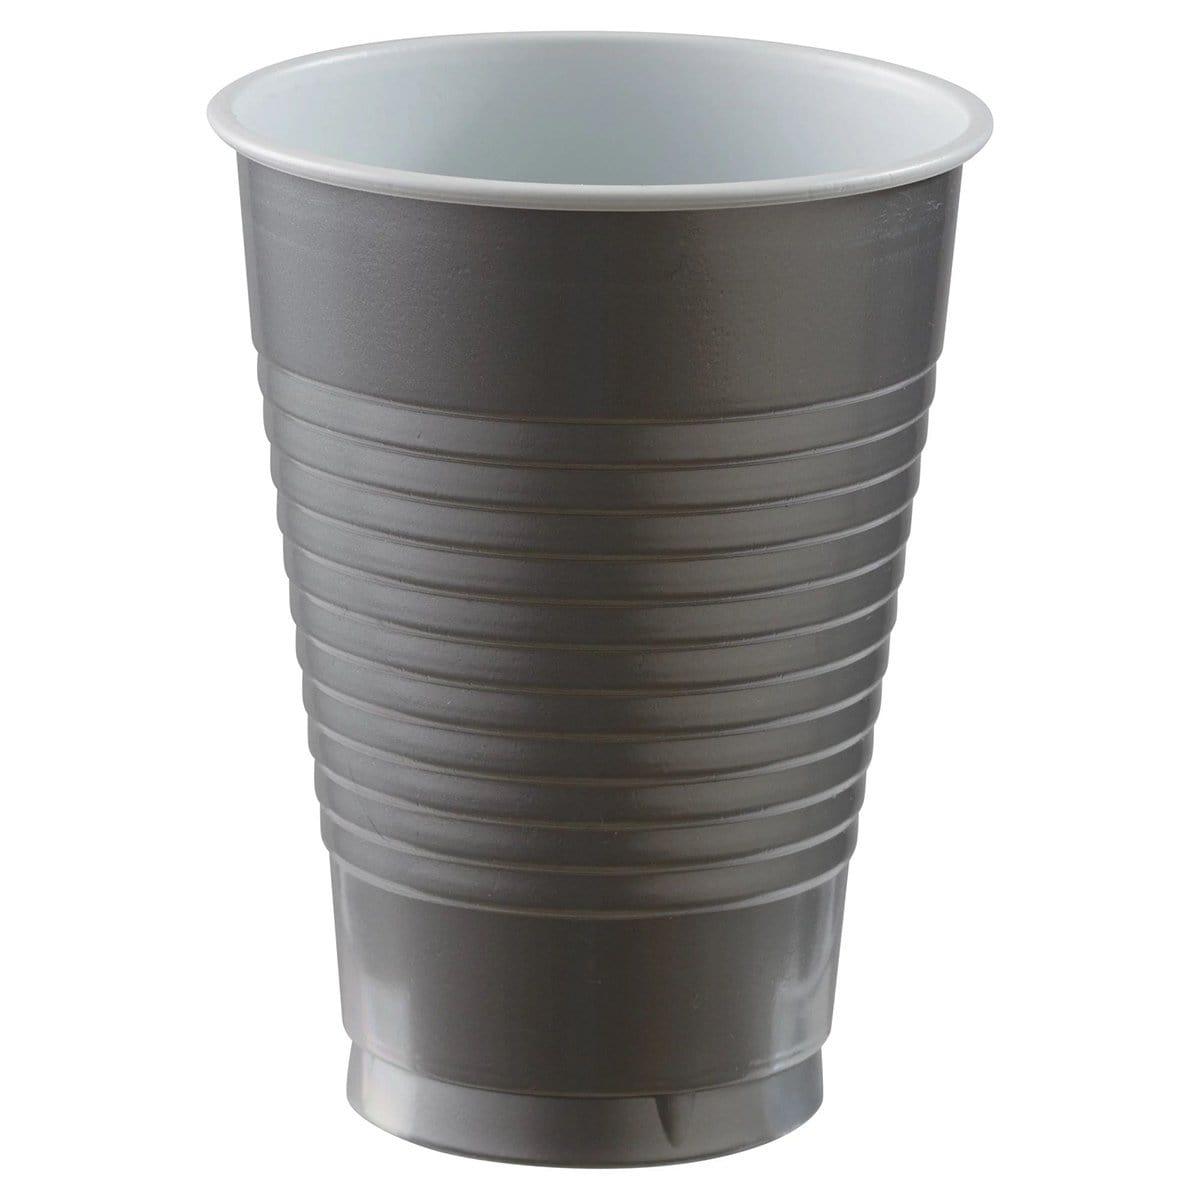 Buy plasticware Silver Plastic Cups, 12 oz., 20 Count sold at Party Expert